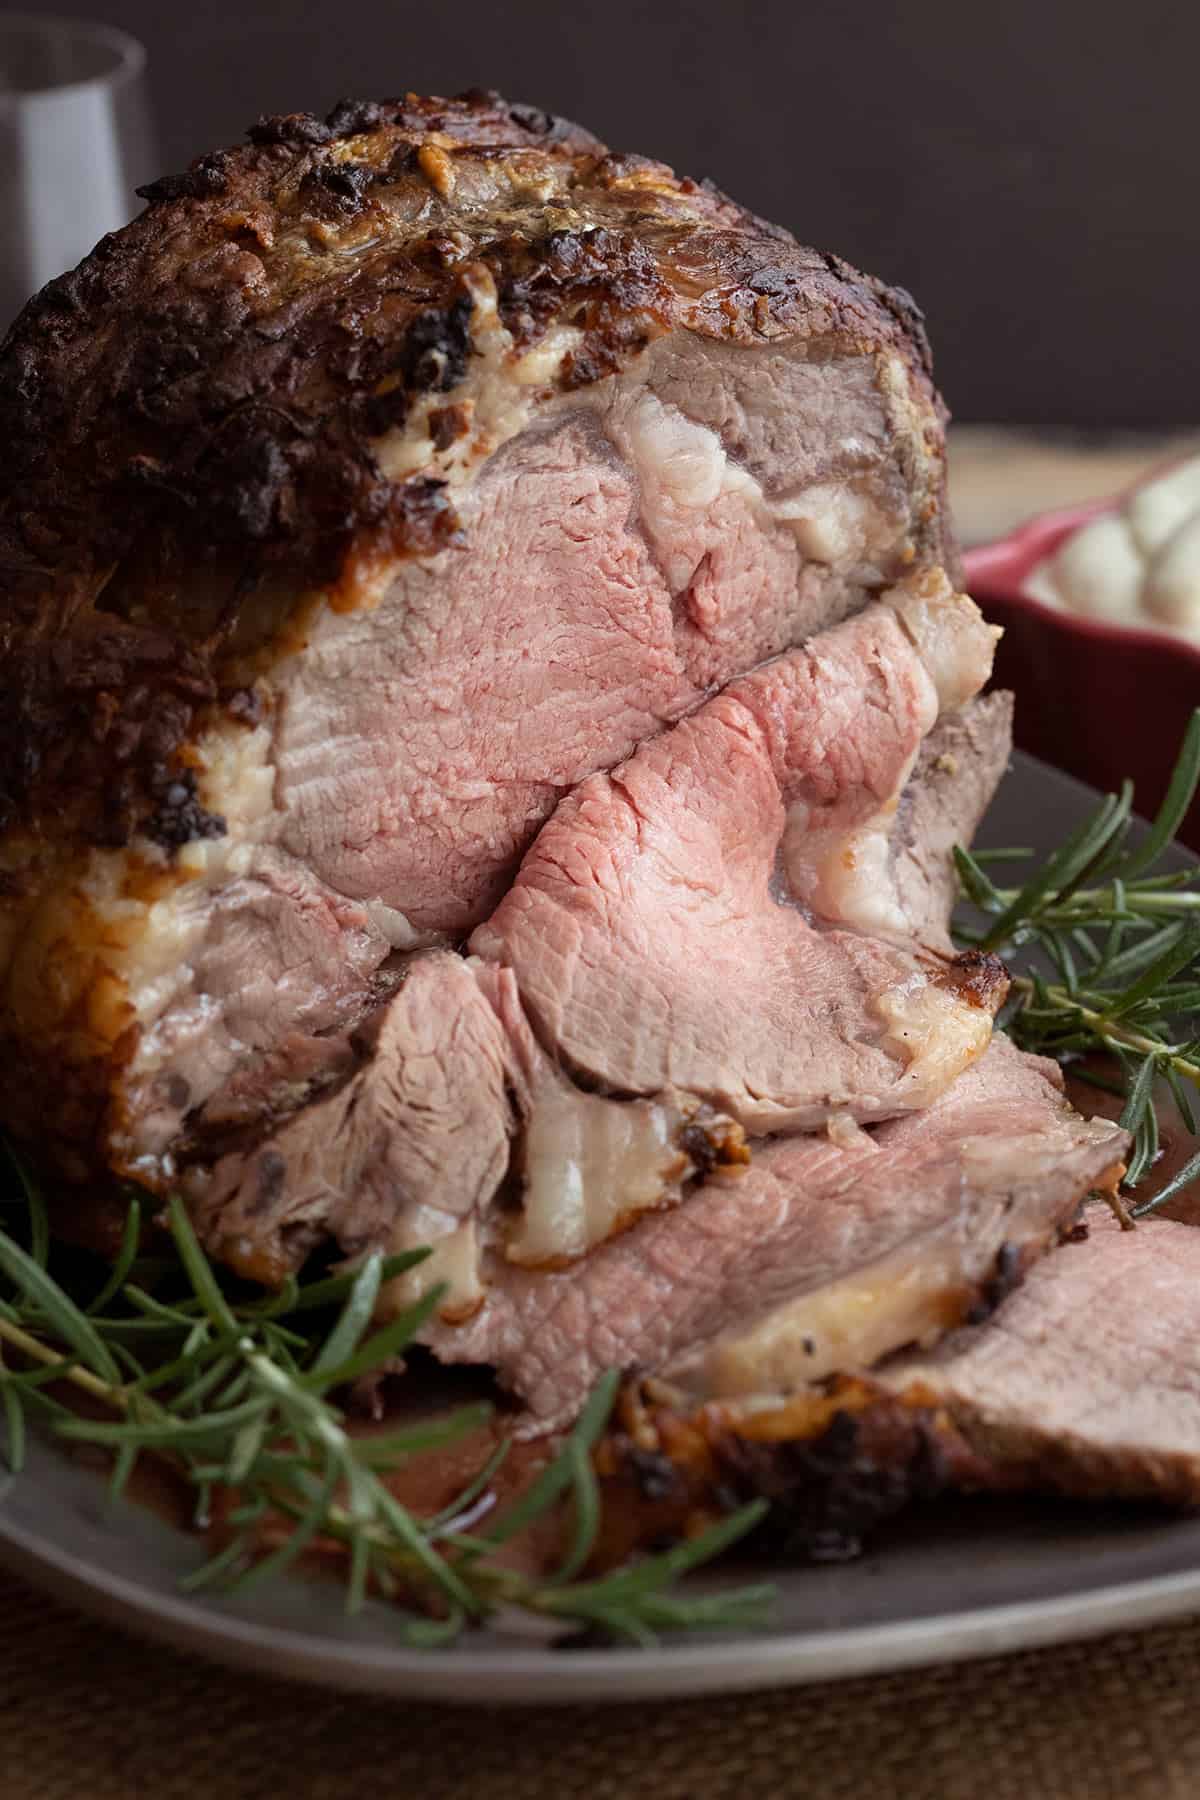 https://alldayidreamaboutfood.com/wp-content/uploads/2021/12/Herb-Crusted-Prime-Rib.jpg